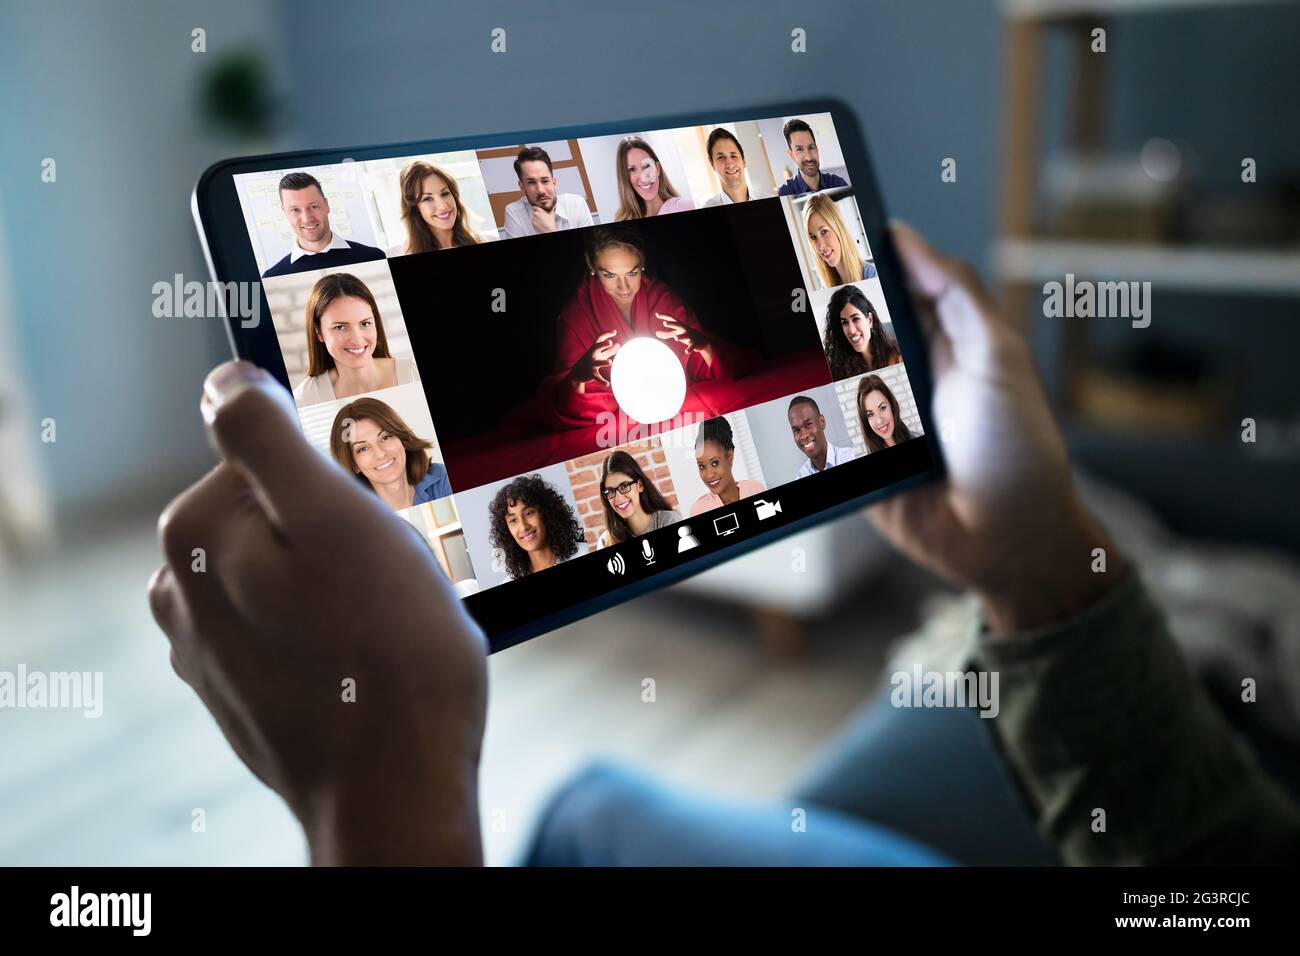 Psychic Reading And Fortune Teller Video Conference Stock Photo